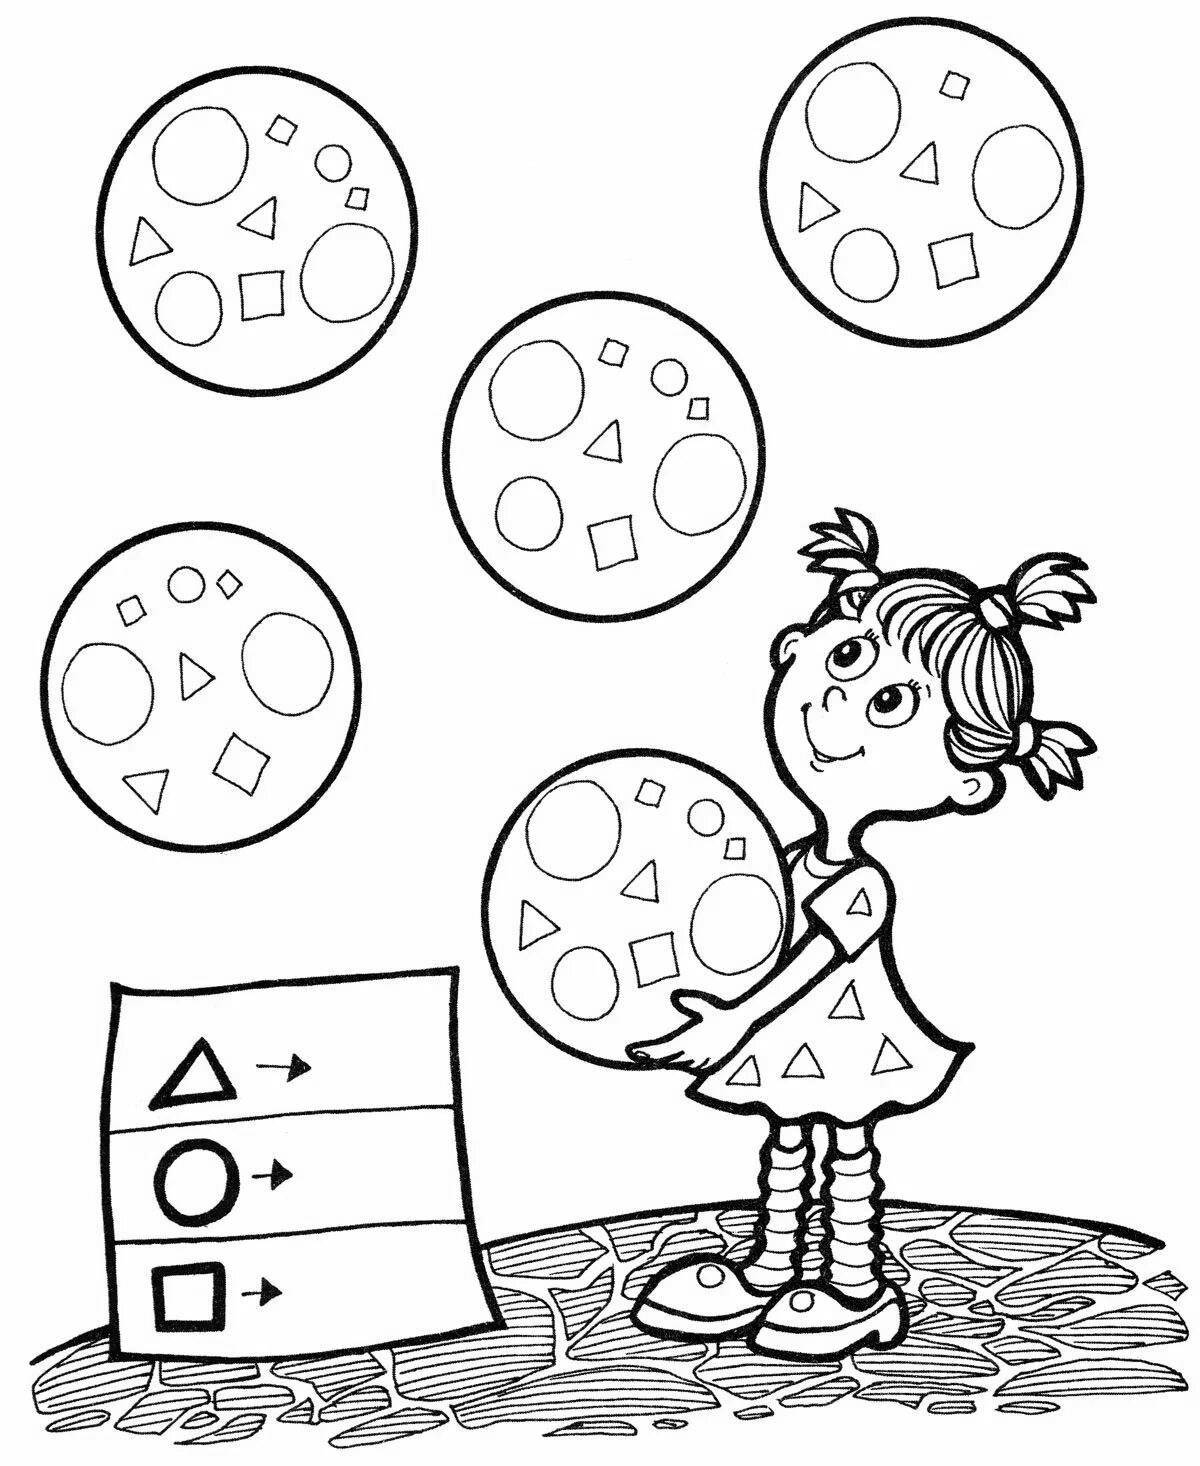 Colorful math calculation coloring pages